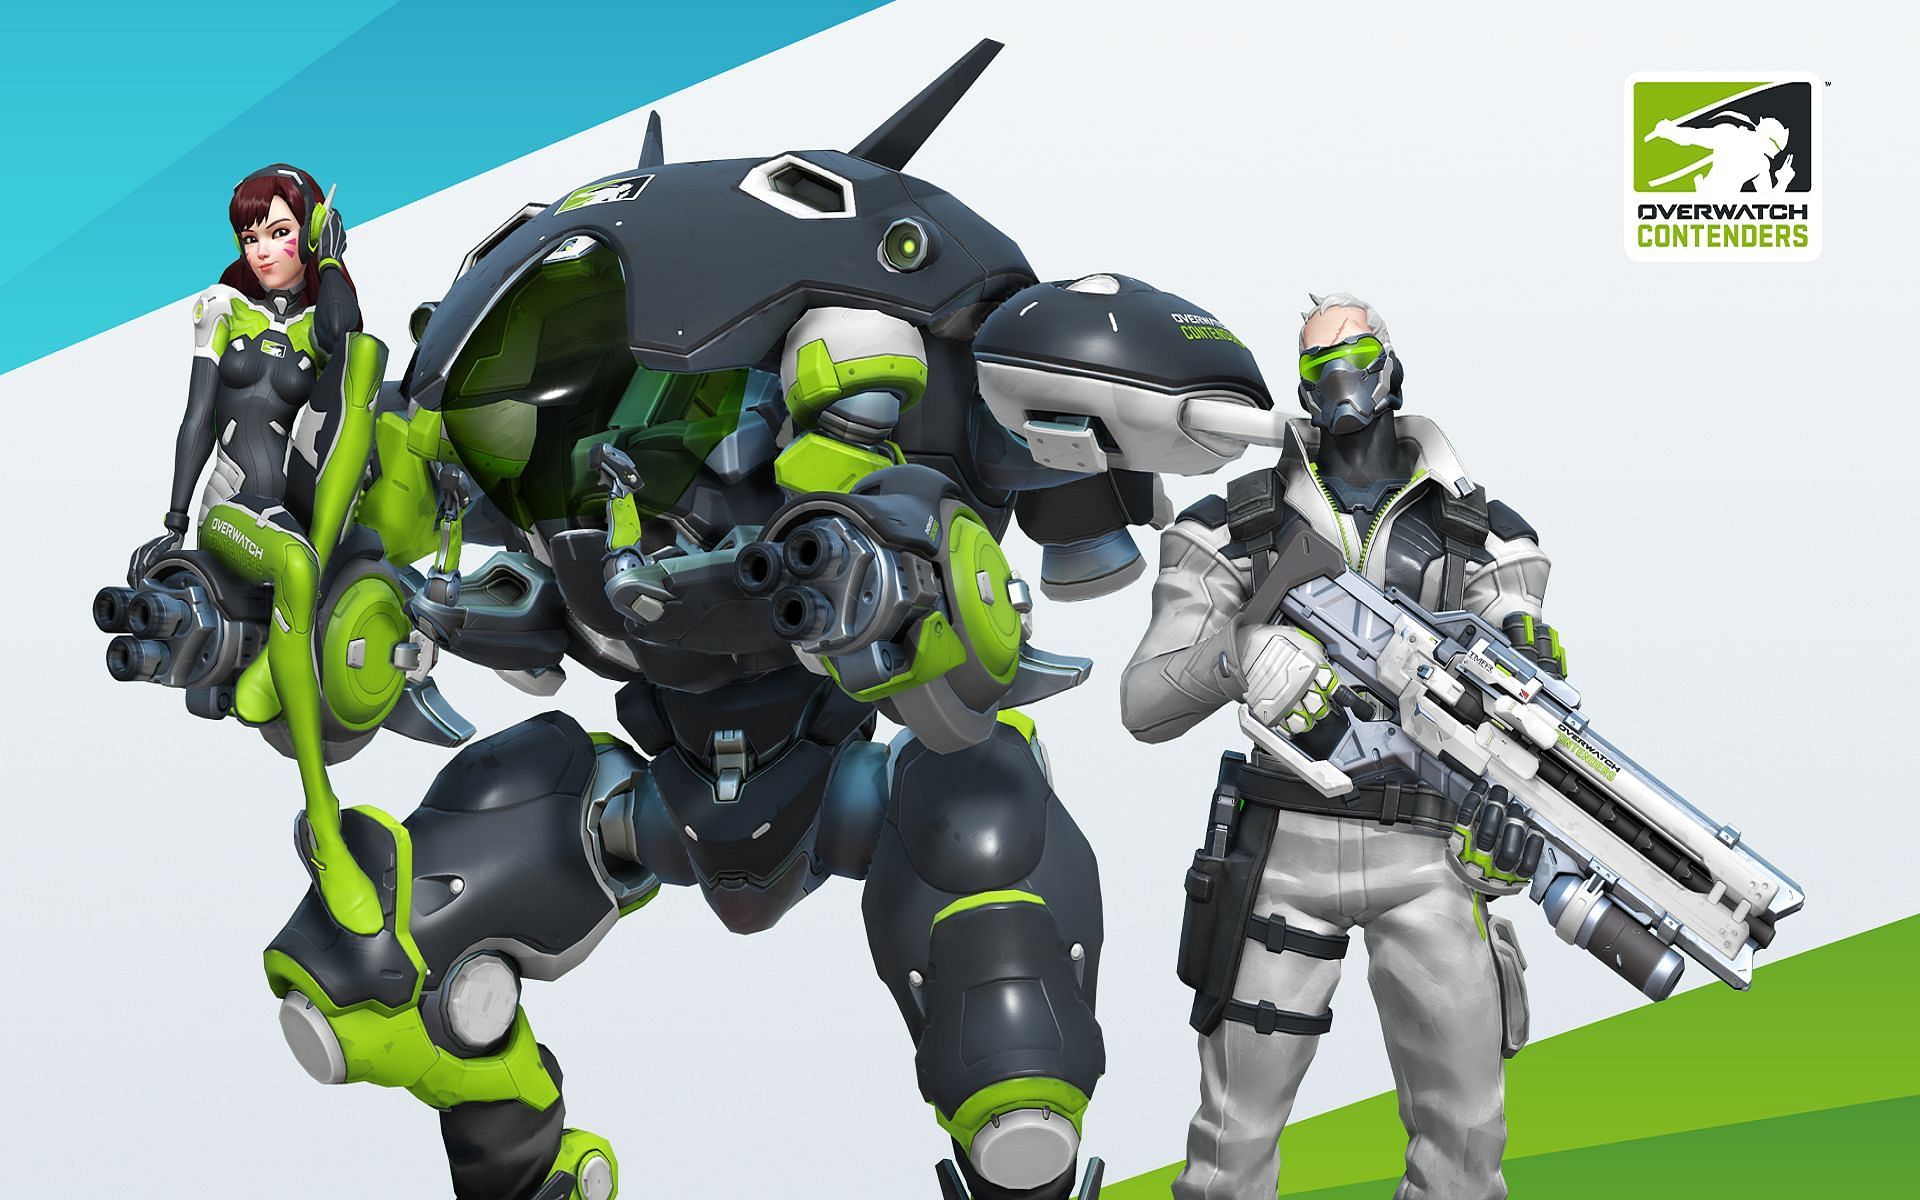 How to get free Hero skins by watching Overwatch Contenders? | Tech